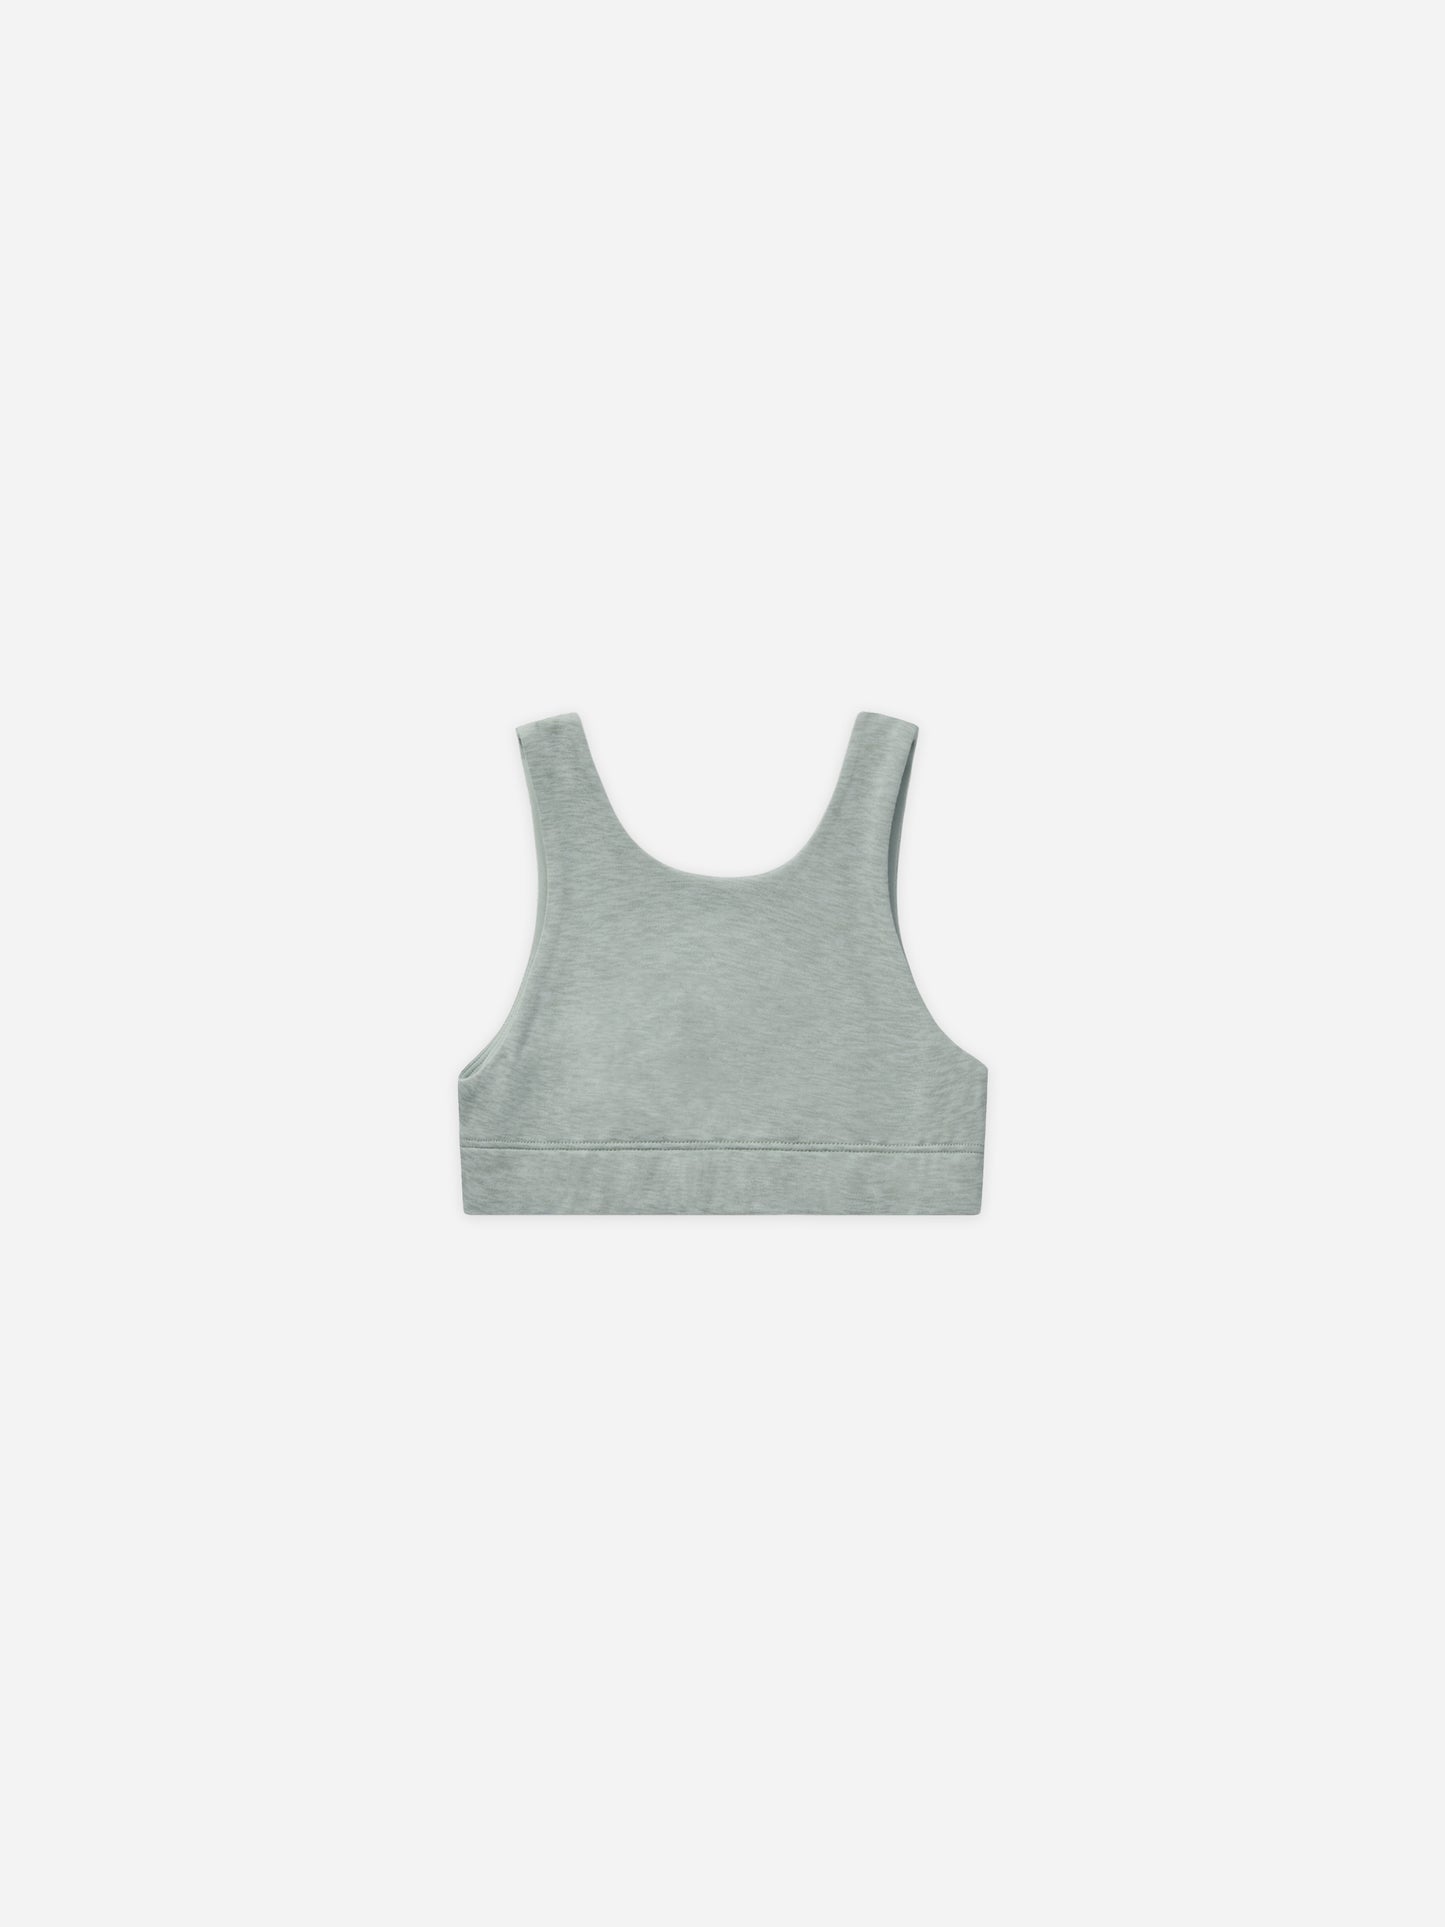 Longline Bra || Heathered Seafoam - Rylee + Cru | Kids Clothes | Trendy Baby Clothes | Modern Infant Outfits |